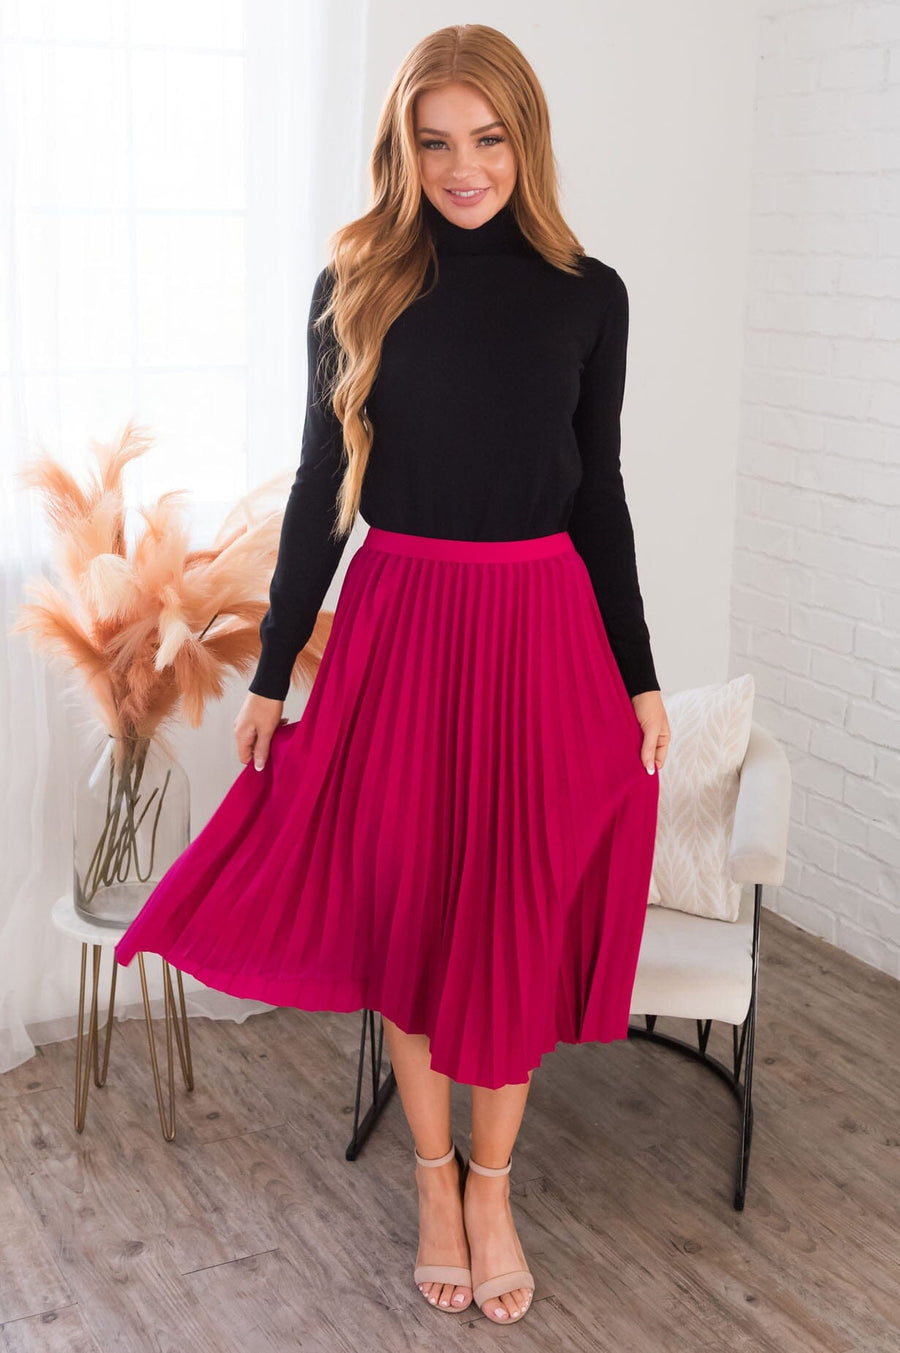 Modest Maxi and Midi Boutique Skirts Page 2 - NeeSee's Dresses